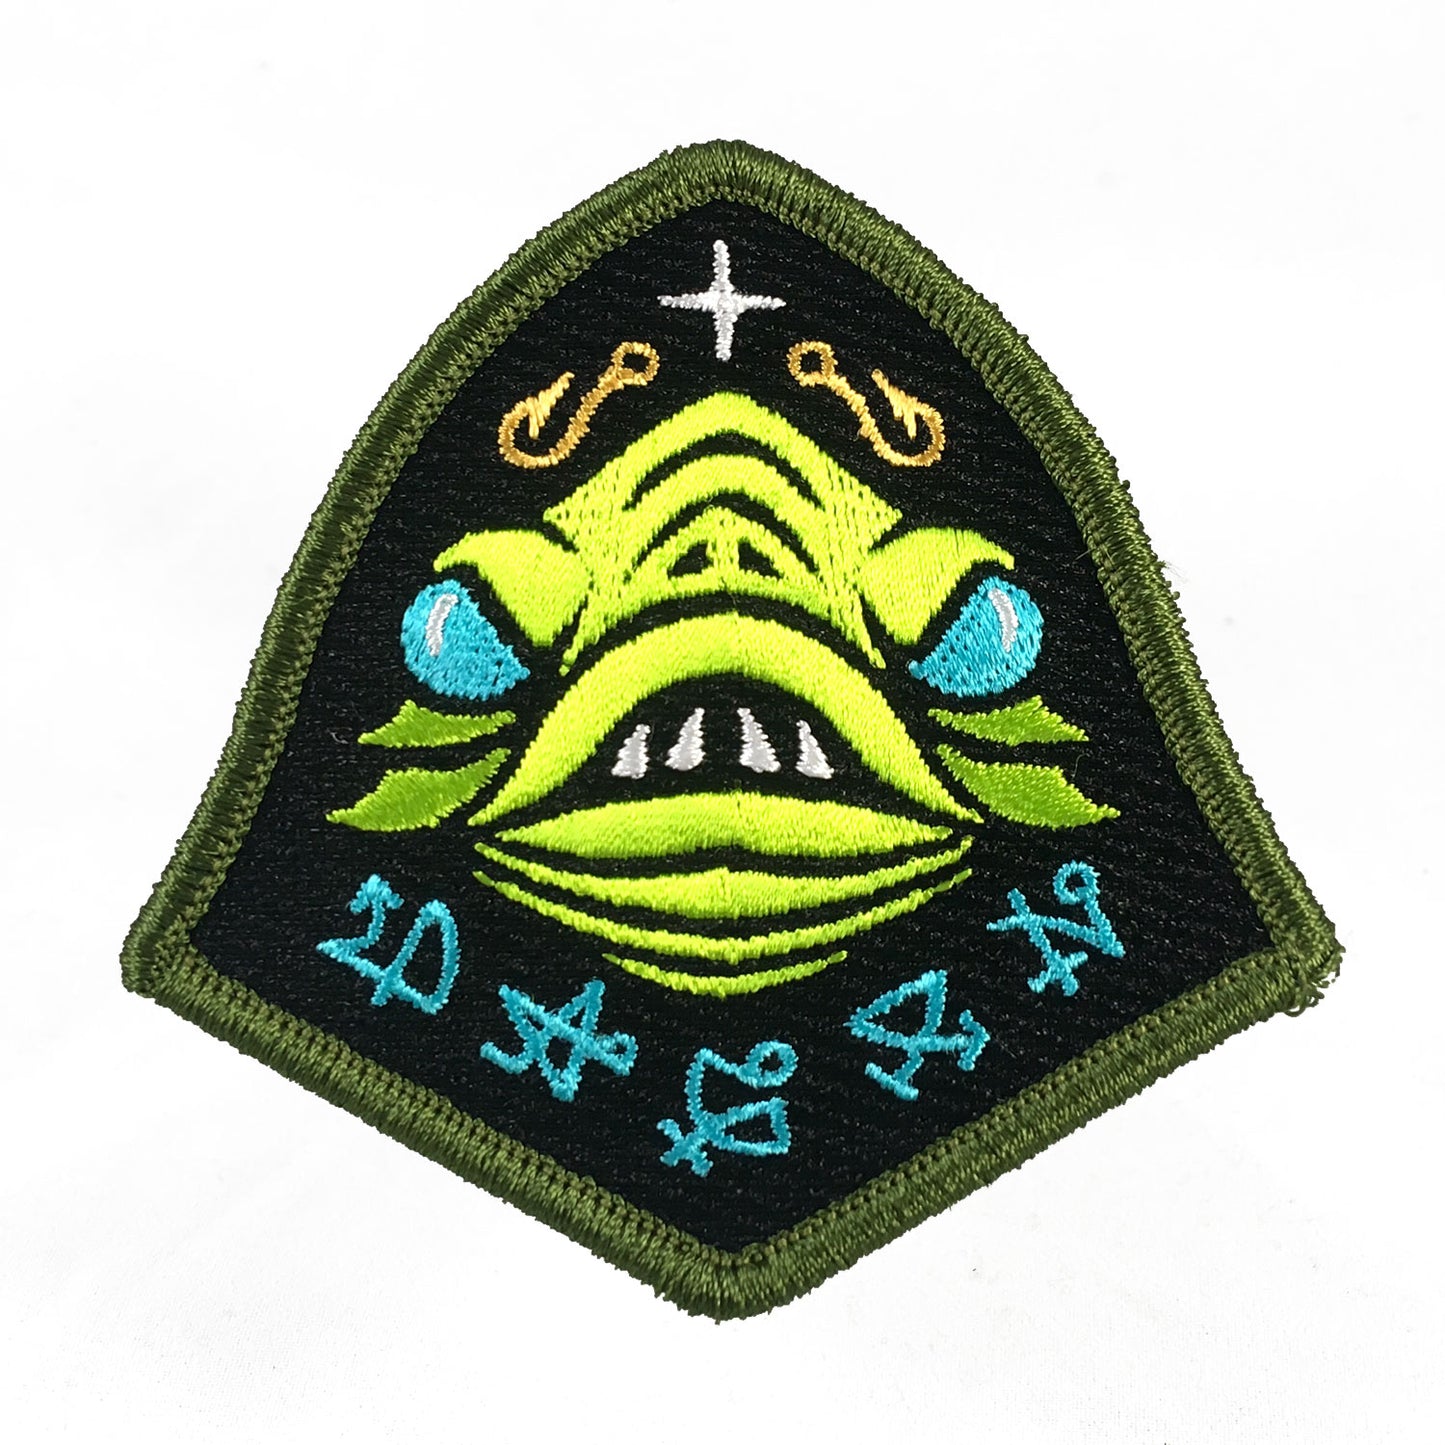 Sons Of Dagon embroidered patch